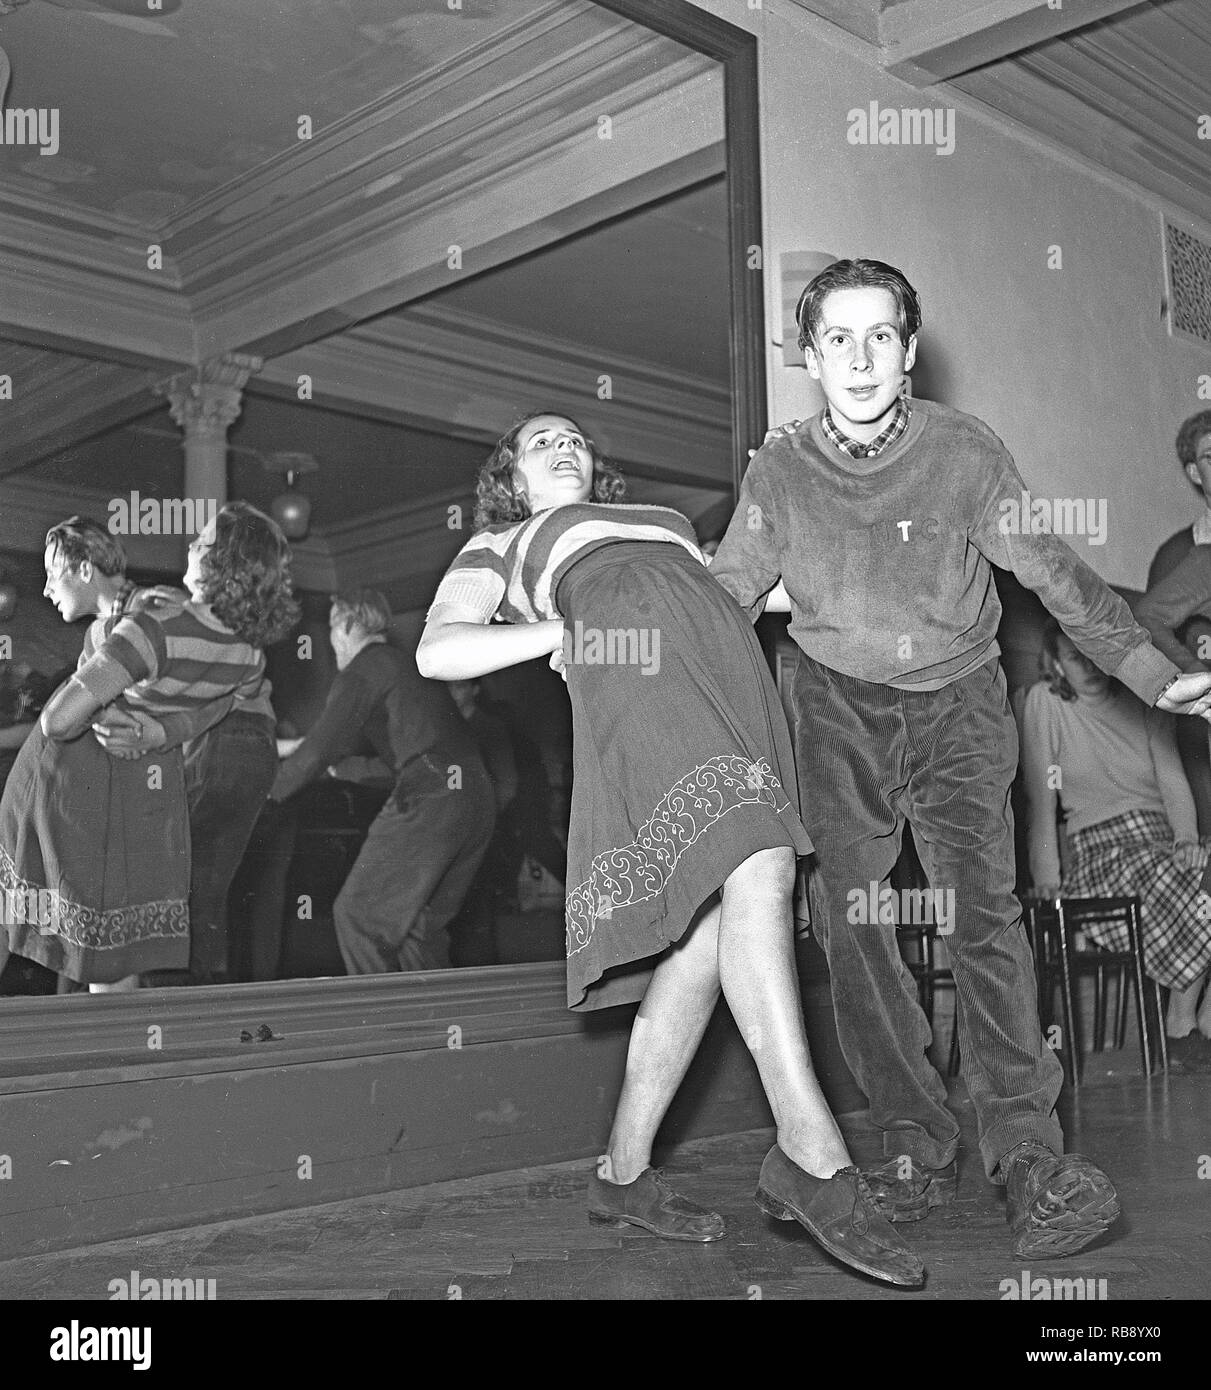 Jitterbug dance. A dance popularized in the United states and spread by American soldiers and sailors around the world during the Second world war. Pictured here a young couple when dancing the Jitterbug dance 1944.  Photo: Kristoffersson ref L3-4 Stock Photo